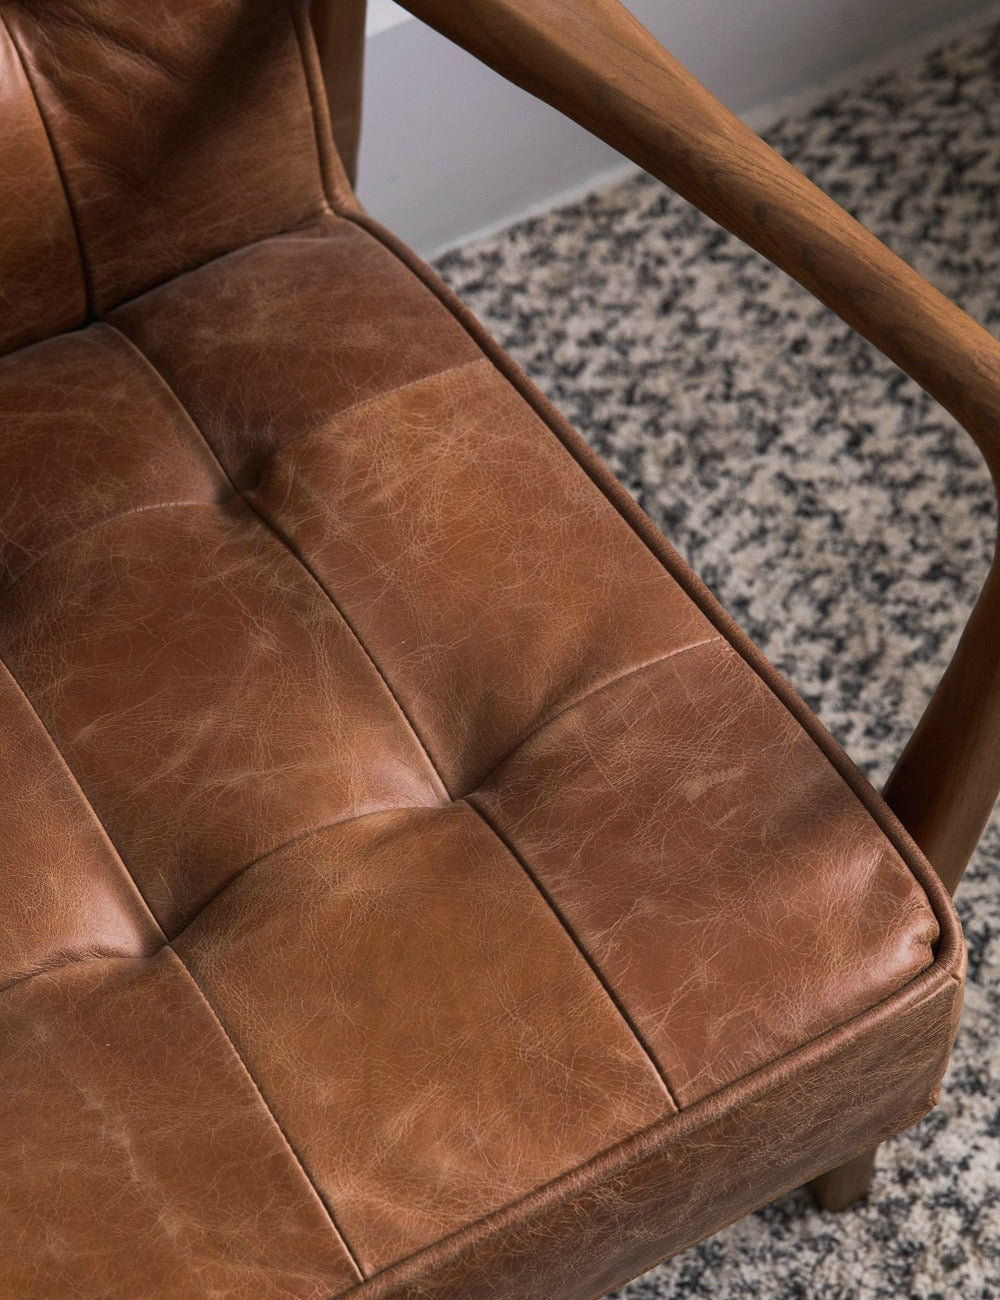 Mid-Century Button-and-Stud Brown Leather Armchair